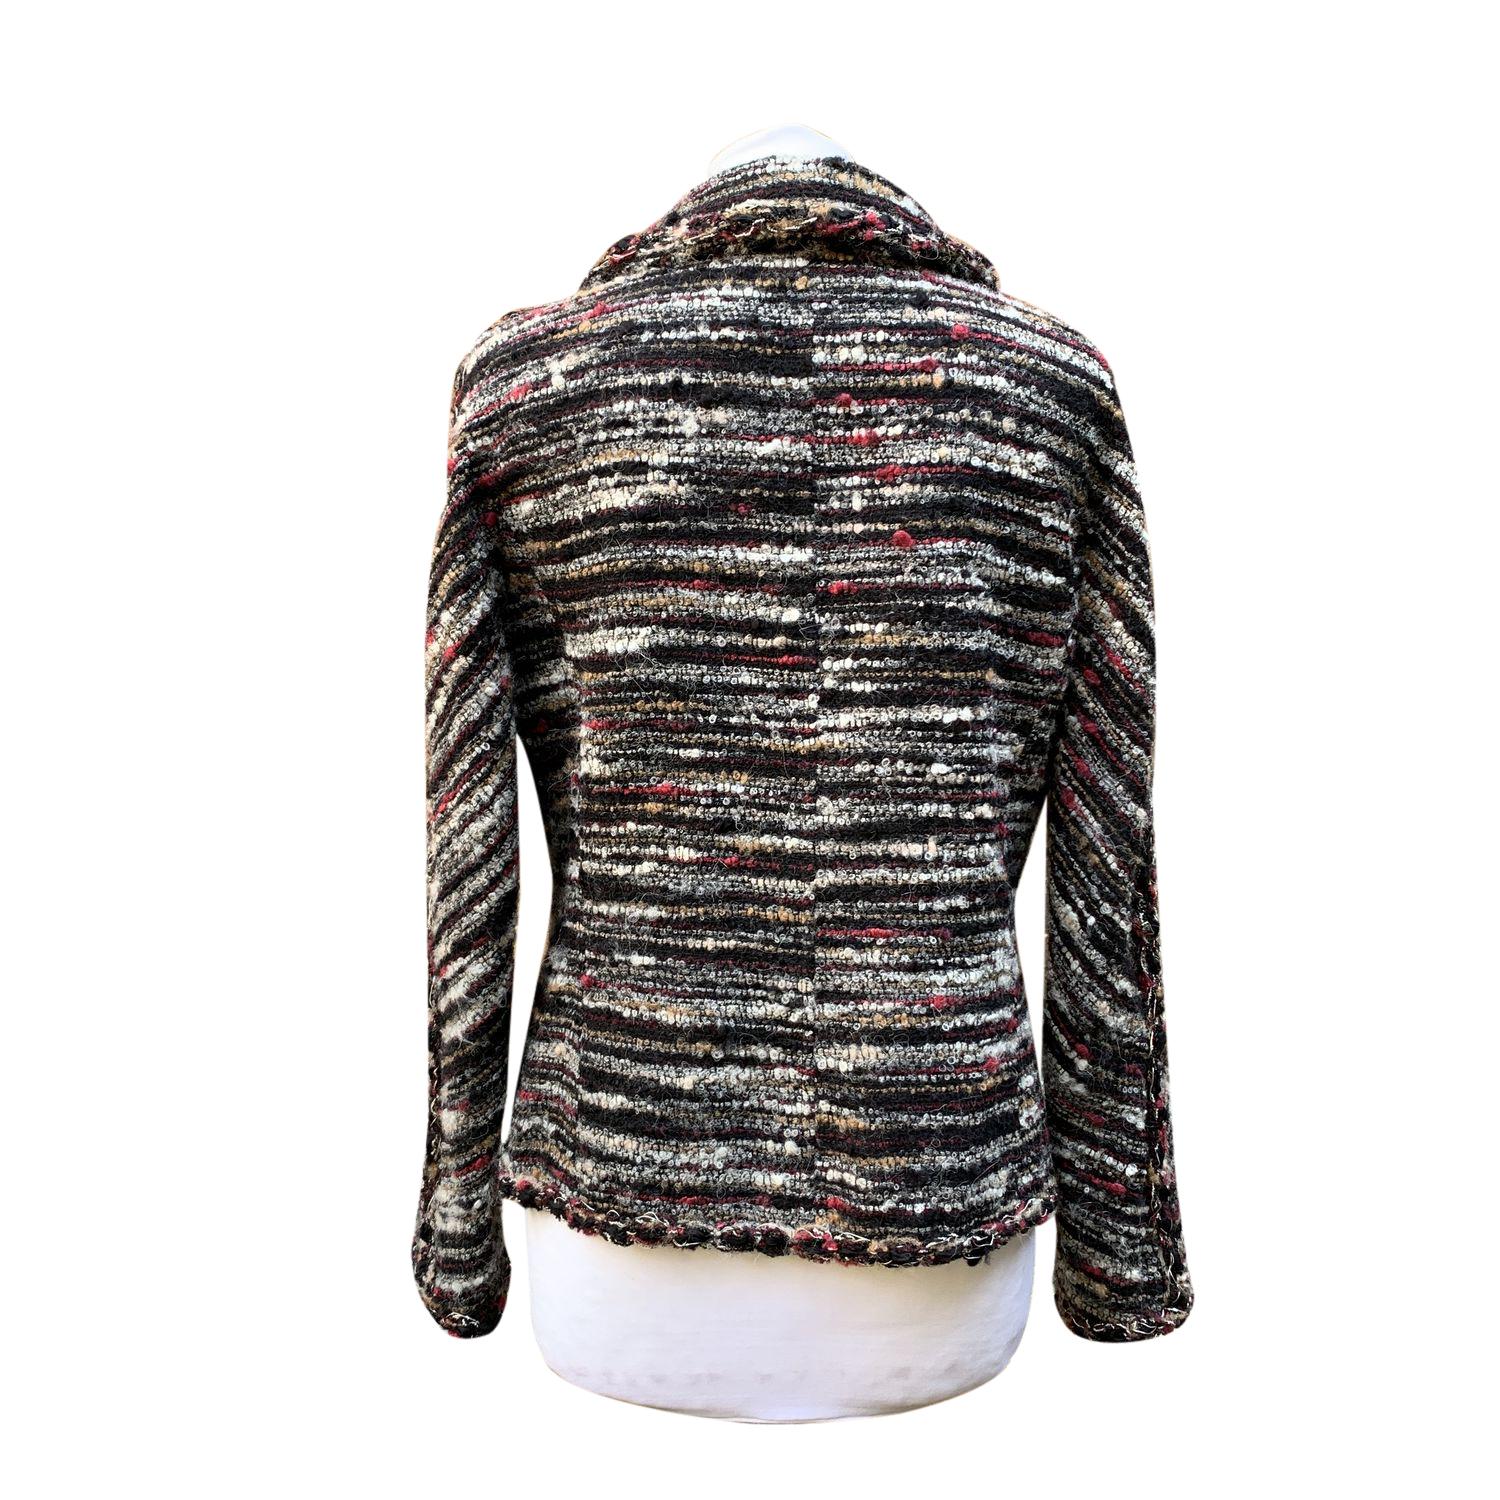 Chanel 2011 Multicolor Wool Jacket Cardigan Size 38 FR In Excellent Condition For Sale In Rome, Rome